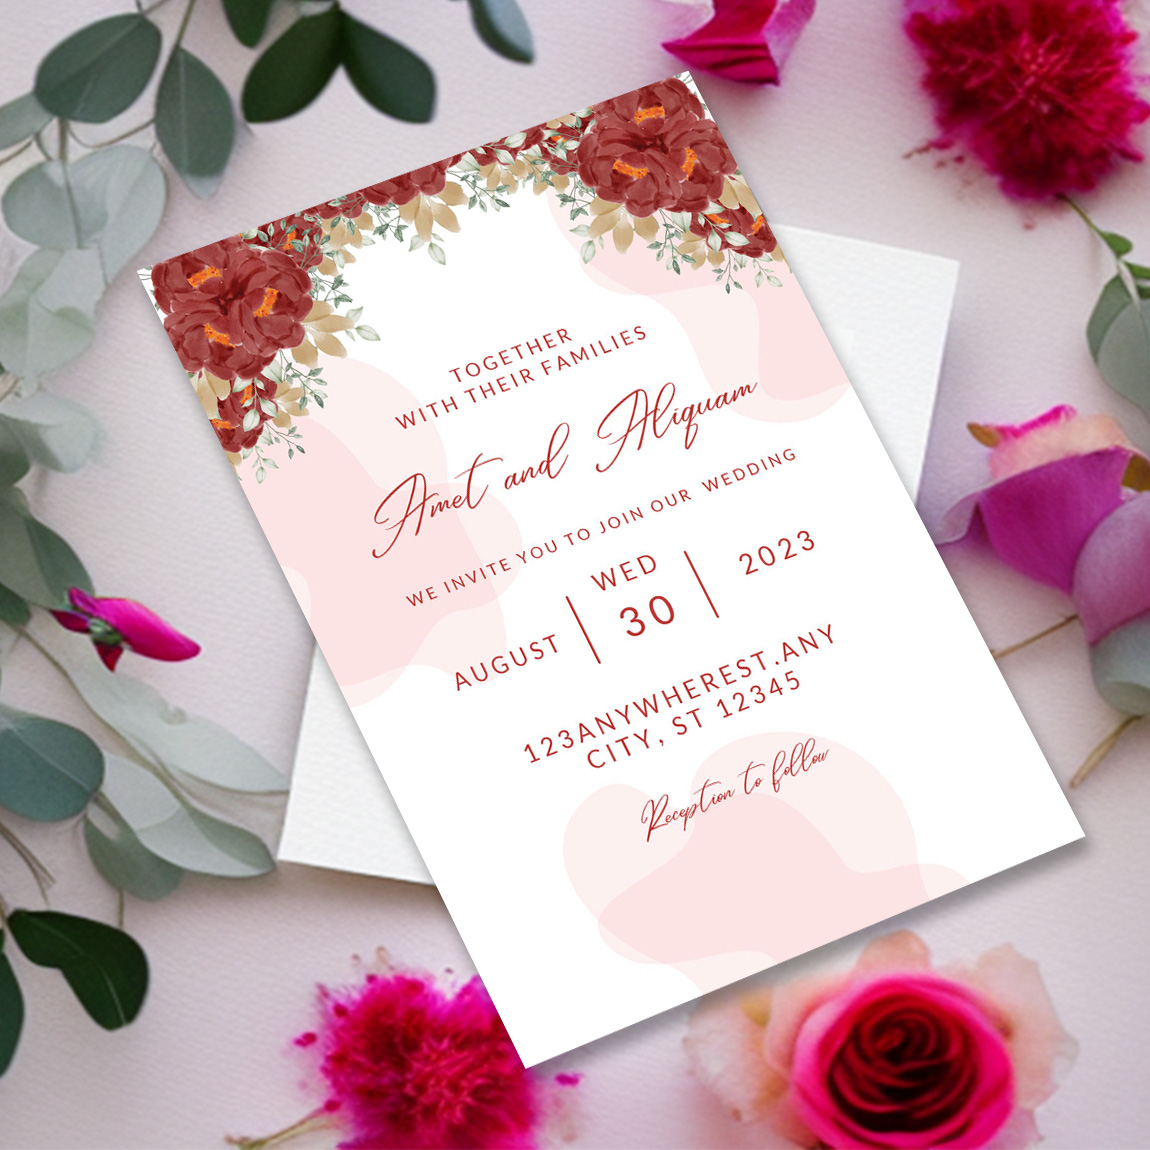 Image of a unique wedding invitation with flowers.